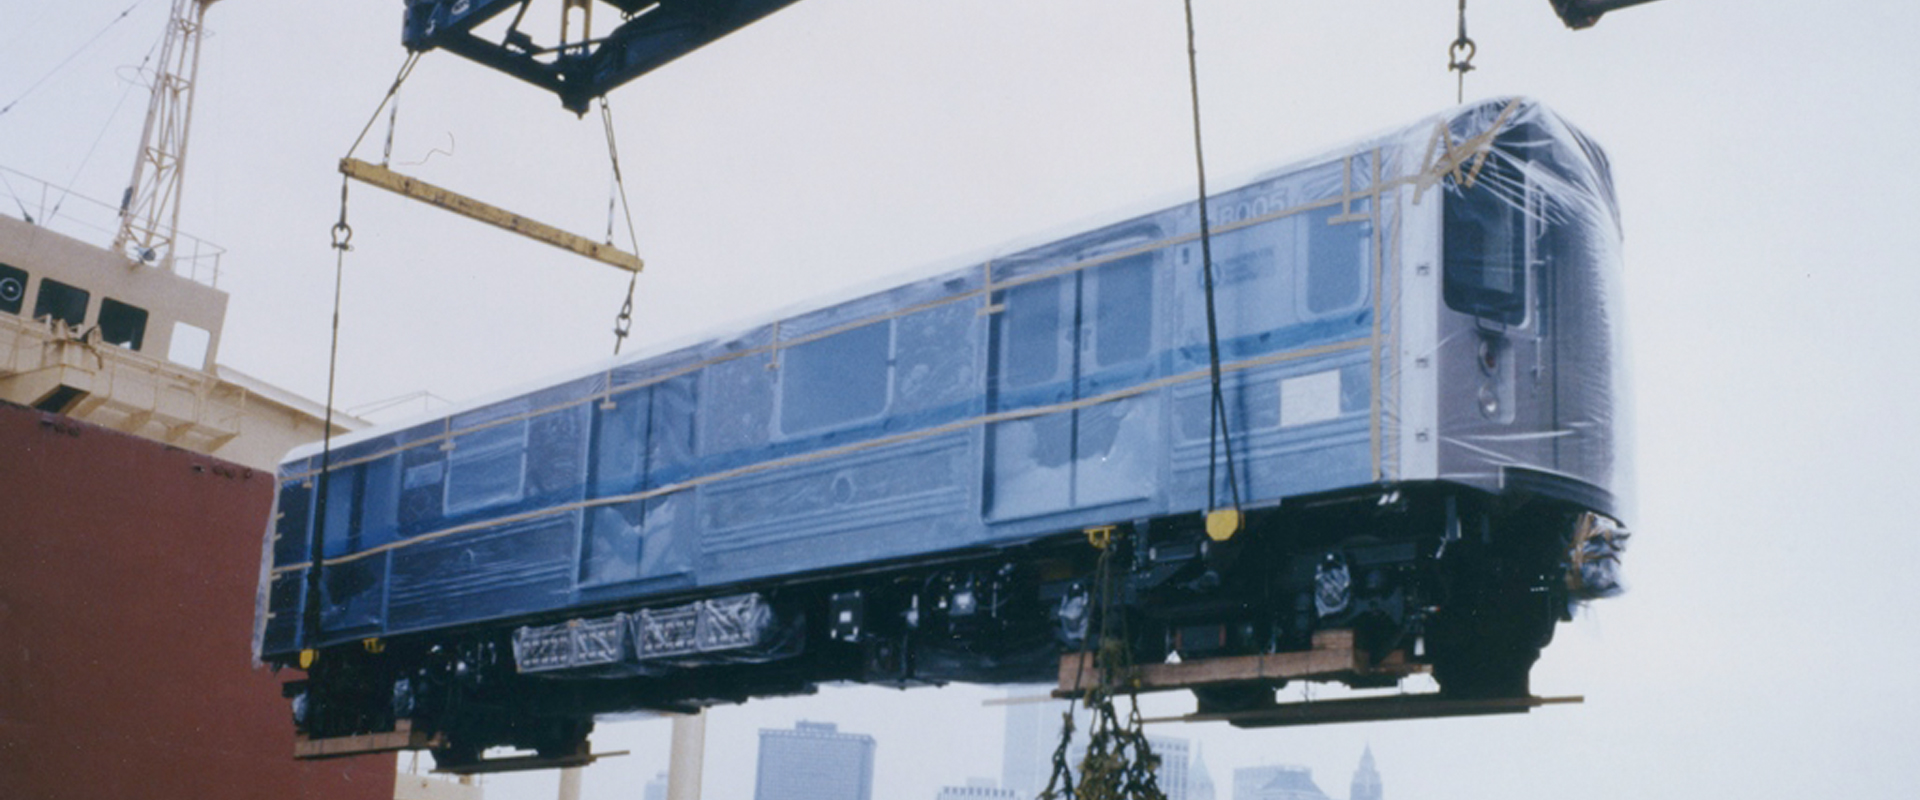 R110A “New Technology” cars, arriving New York via ship in October 1992.